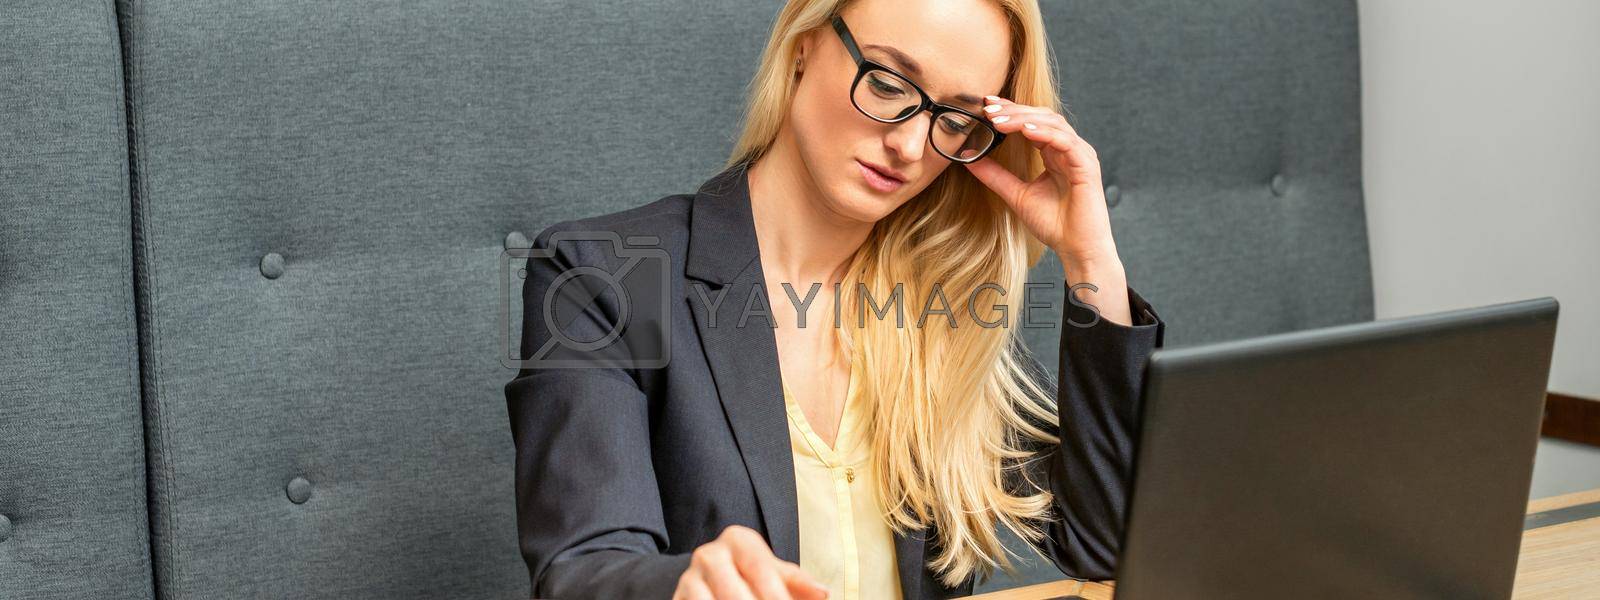 Royalty free image of Young businesswoman using laptop in cafe by okskukuruza